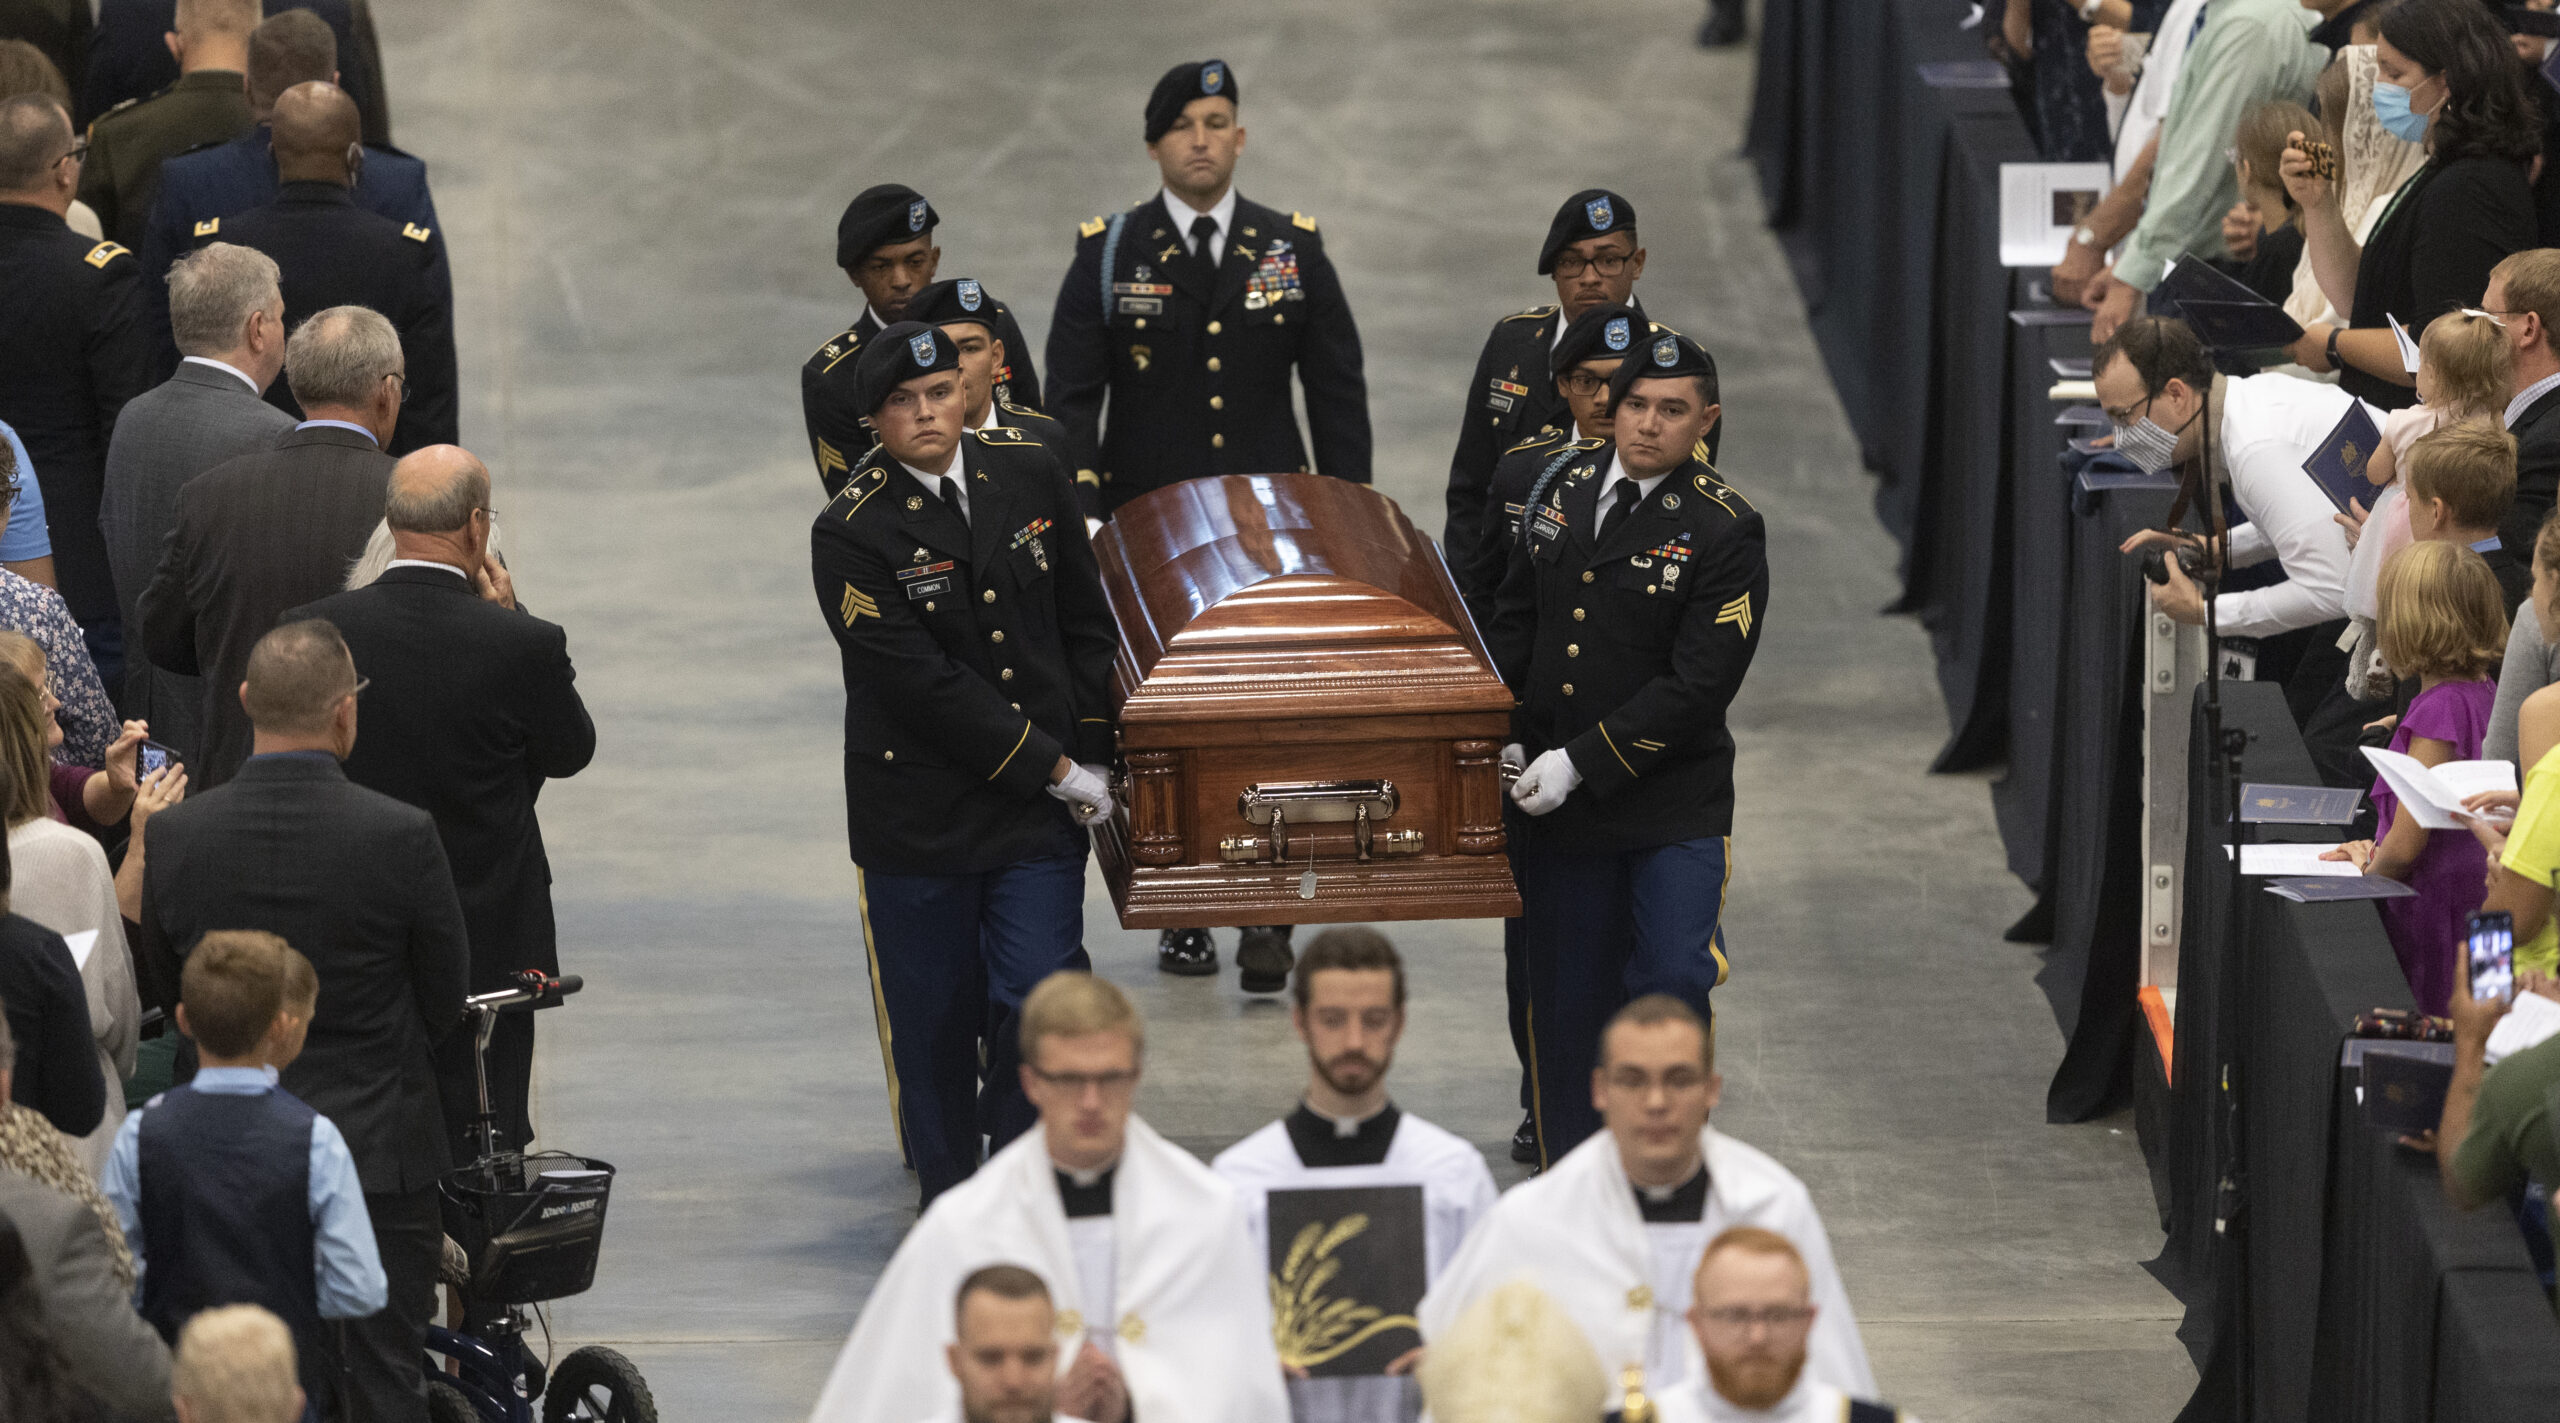 A Fort Riley honor guard carries the remains of Father Emil to an altar during Kapaun's funeral Mass on Wednesday, Sept. 29, 2021, in Wichita, Kan. Kapaun died in a North Korean POW camp in May of 1951. He was posthumously awarded the Medal of Honor in 2013 for his bravery in the Korean War. Kapaun's remains were identified earlier this year and returned home to Kansas recently. (Travis Heying/The Wichita Eagle via AP)